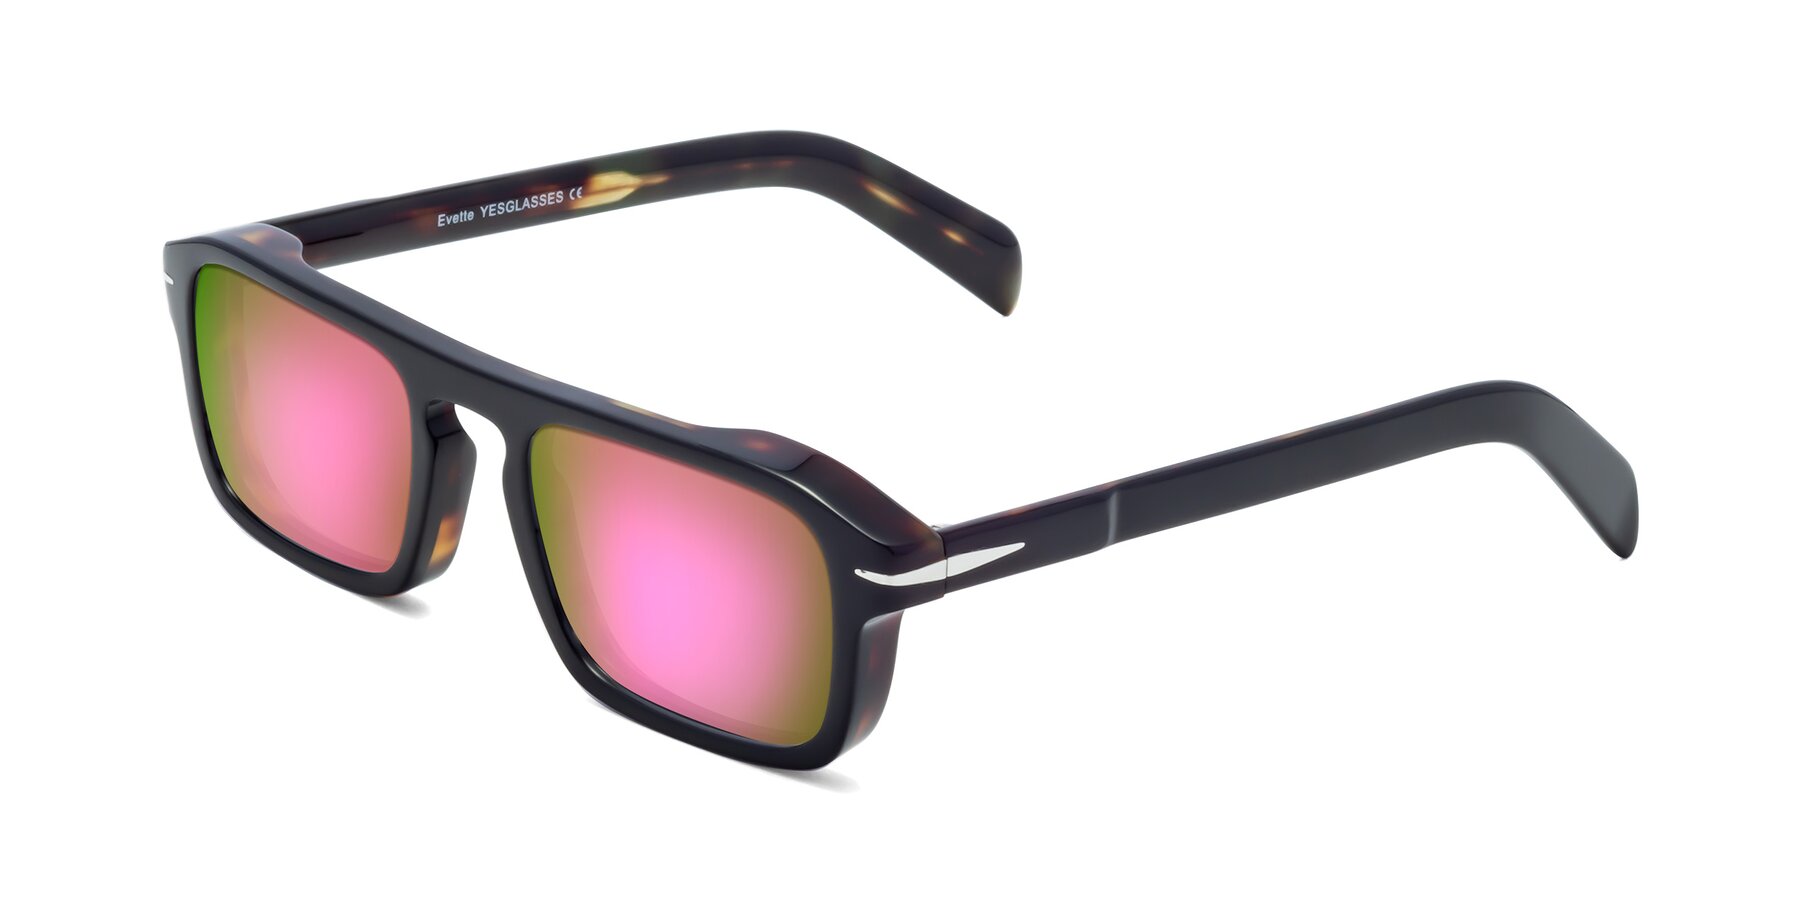 Angle of Evette in Black-Tortoise with Pink Mirrored Lenses